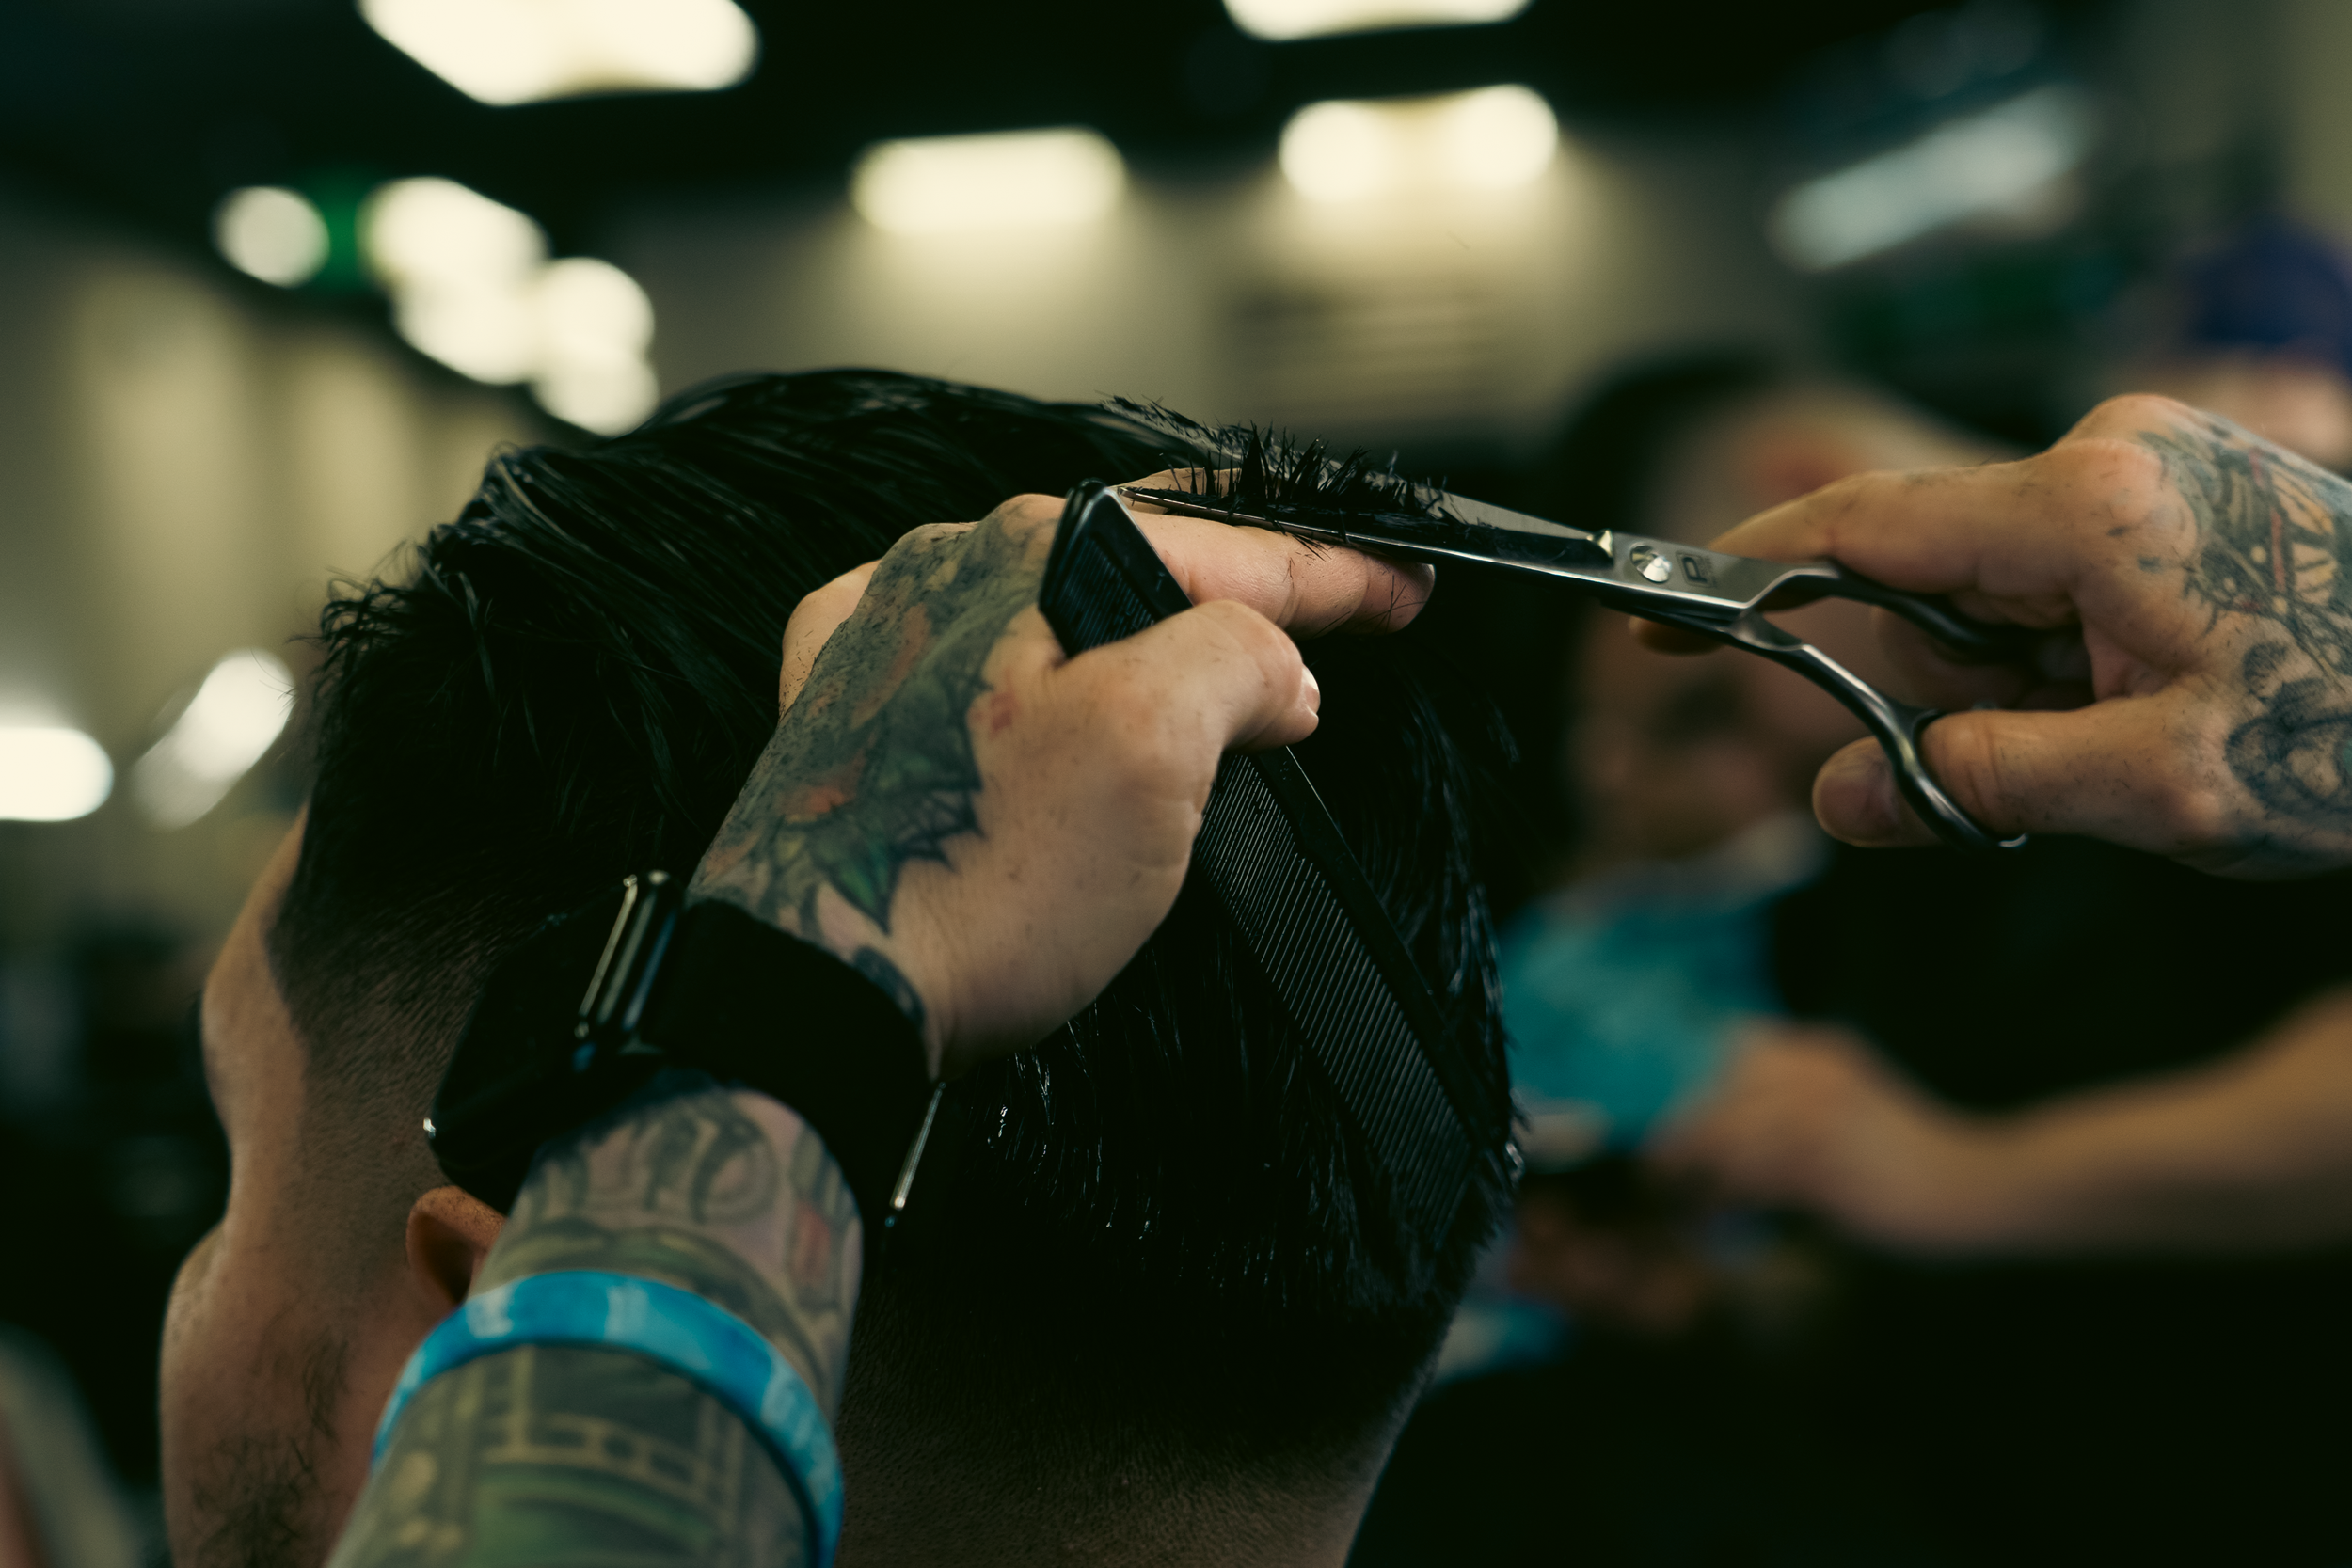 Load video: Barber using Hachi Shears